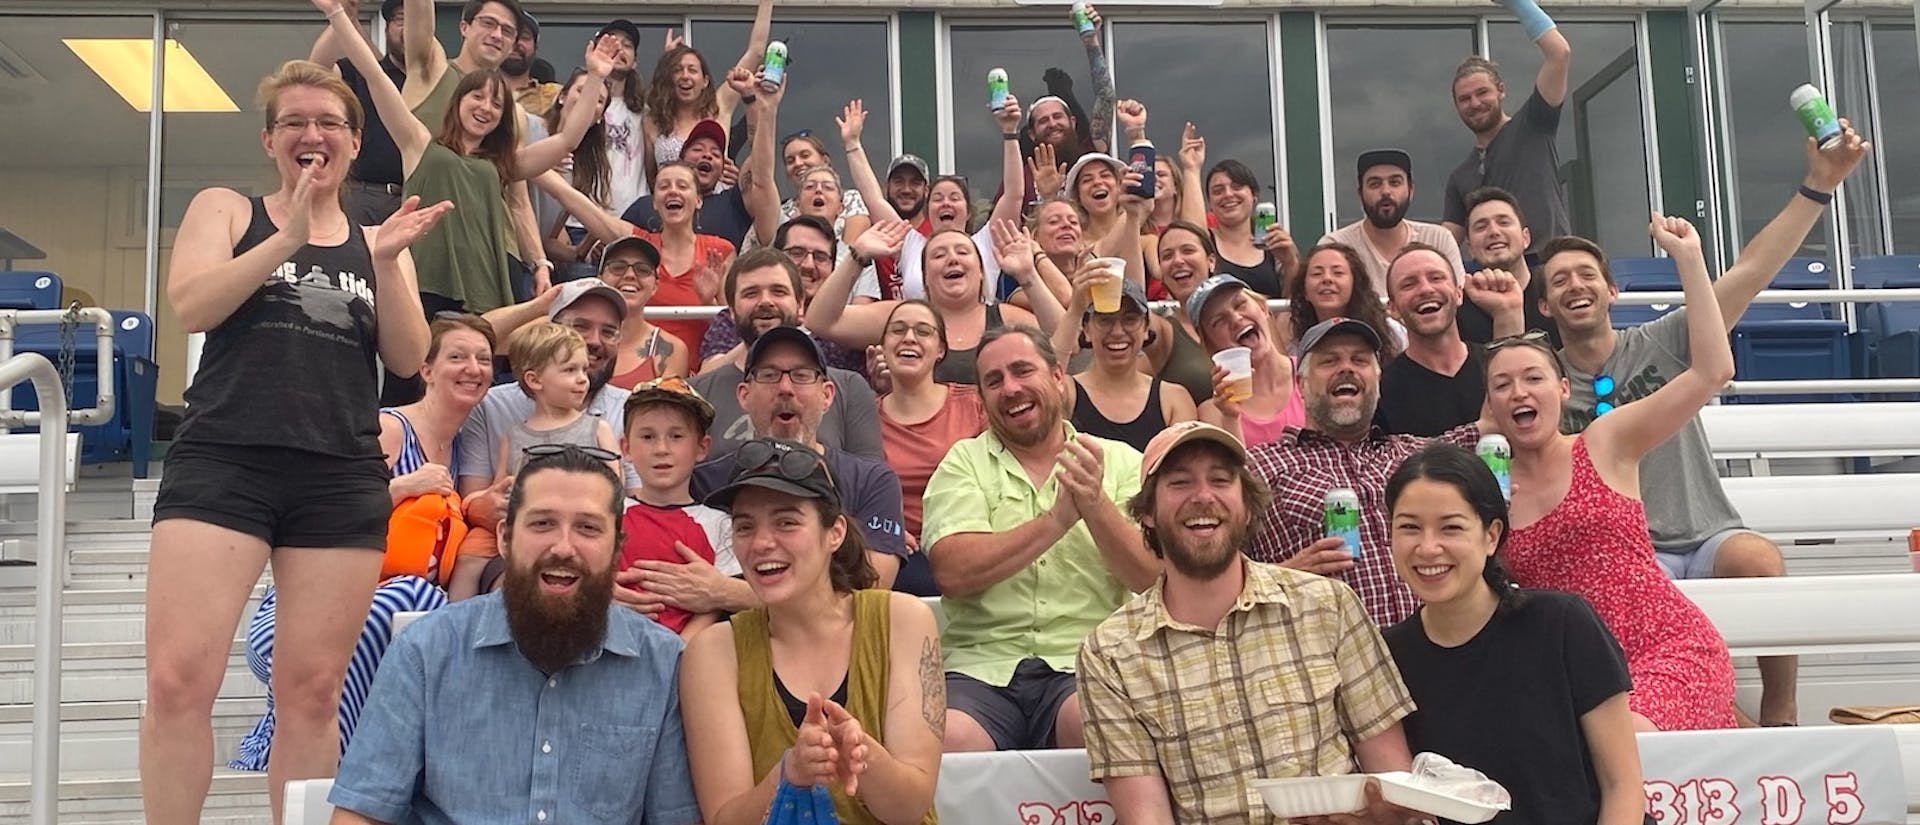 A majority of the Rising Tide staff and their significant others gathered together and cheering at a SeaDogs game.  